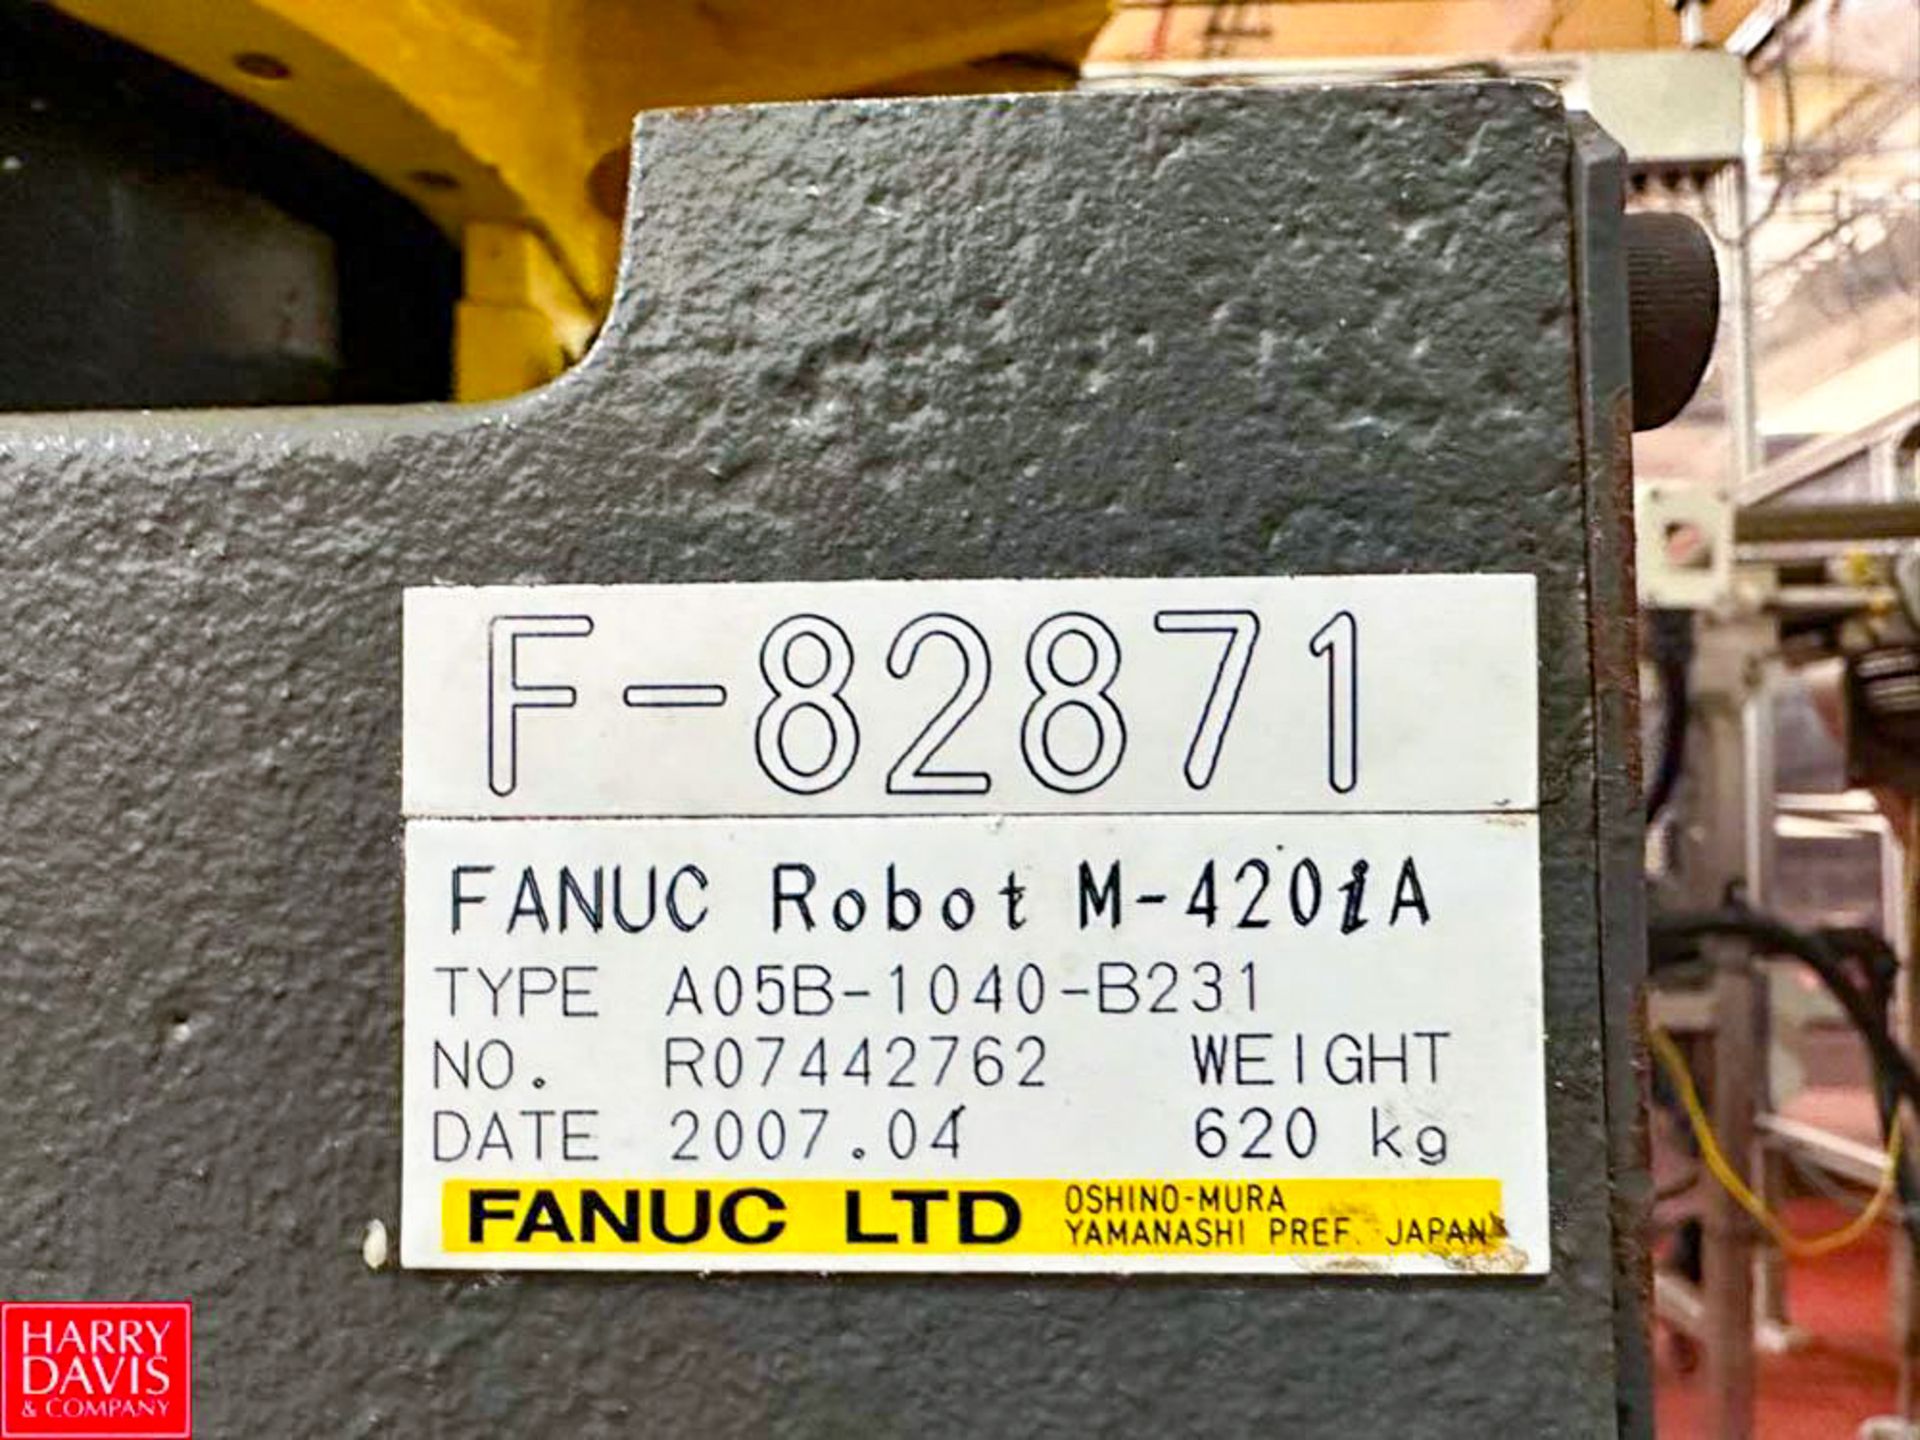 Fanuc Palletizing Robot, Model: M-420iA, S/N: R07442762 with Fanuc R-30iA Control System, R-J3iC Pow - Image 2 of 3